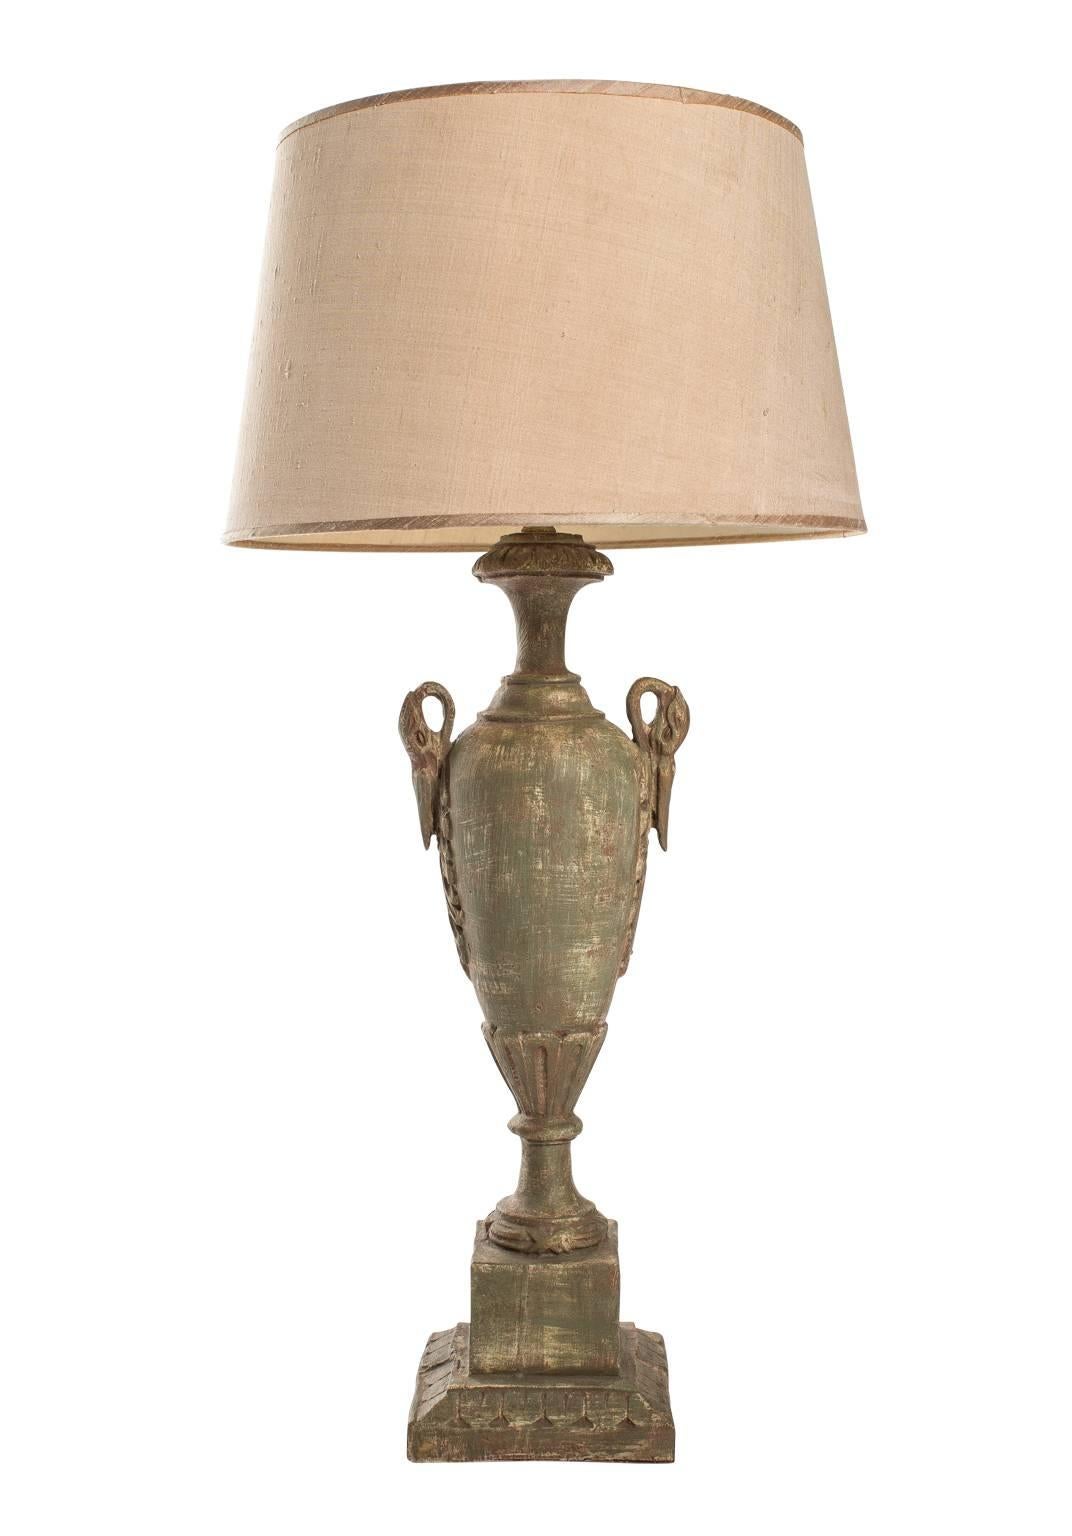 Pair of neoclassical style painted wood, urn form table lamps.